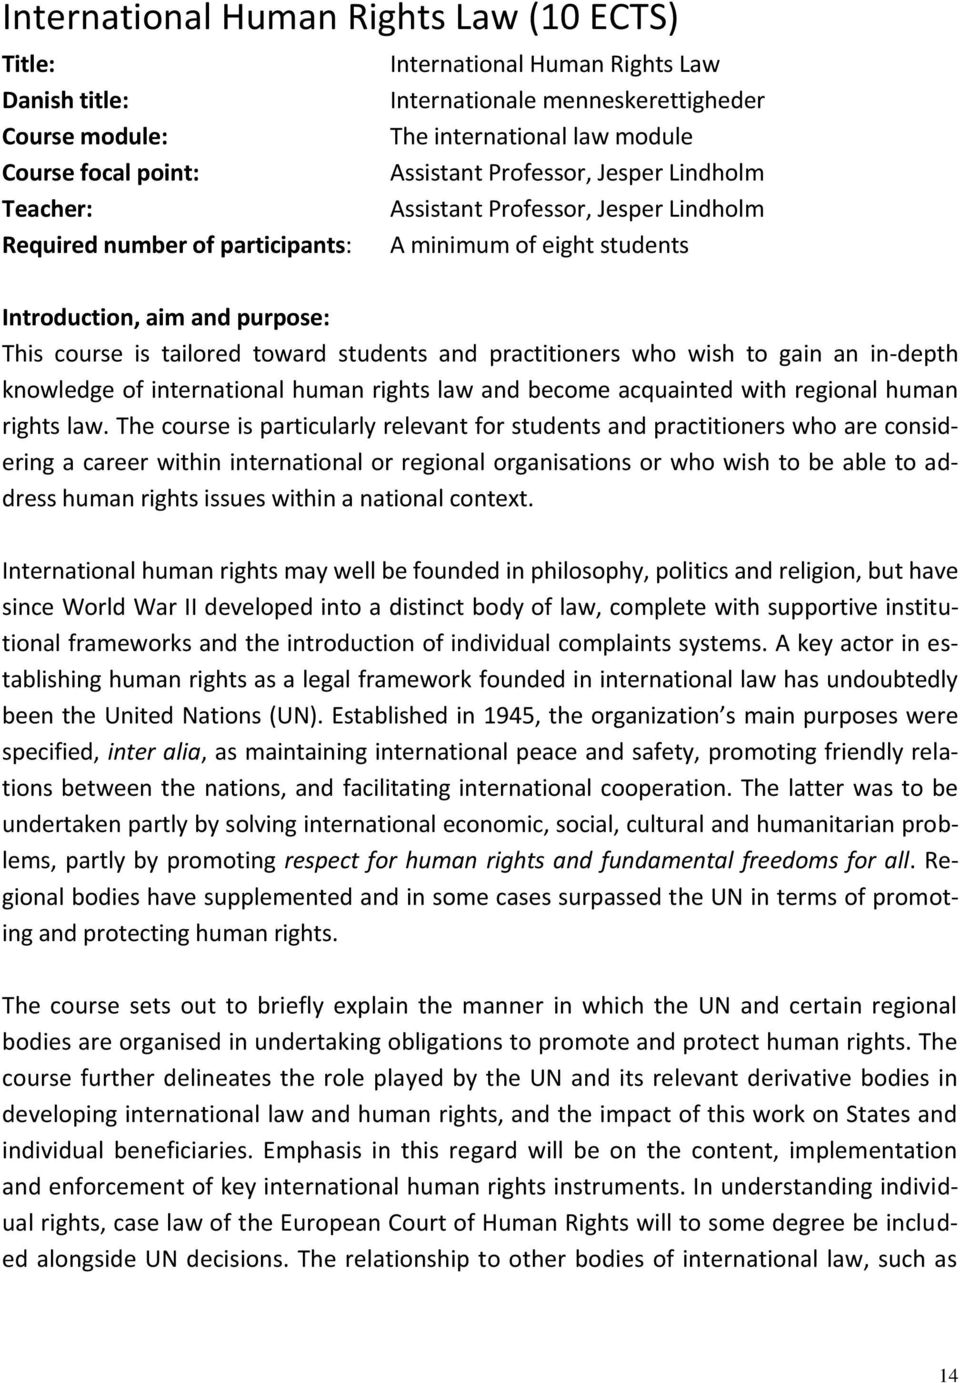 tailored toward students and practitioners who wish to gain an in-depth knowledge of international human rights law and become acquainted with regional human rights law.